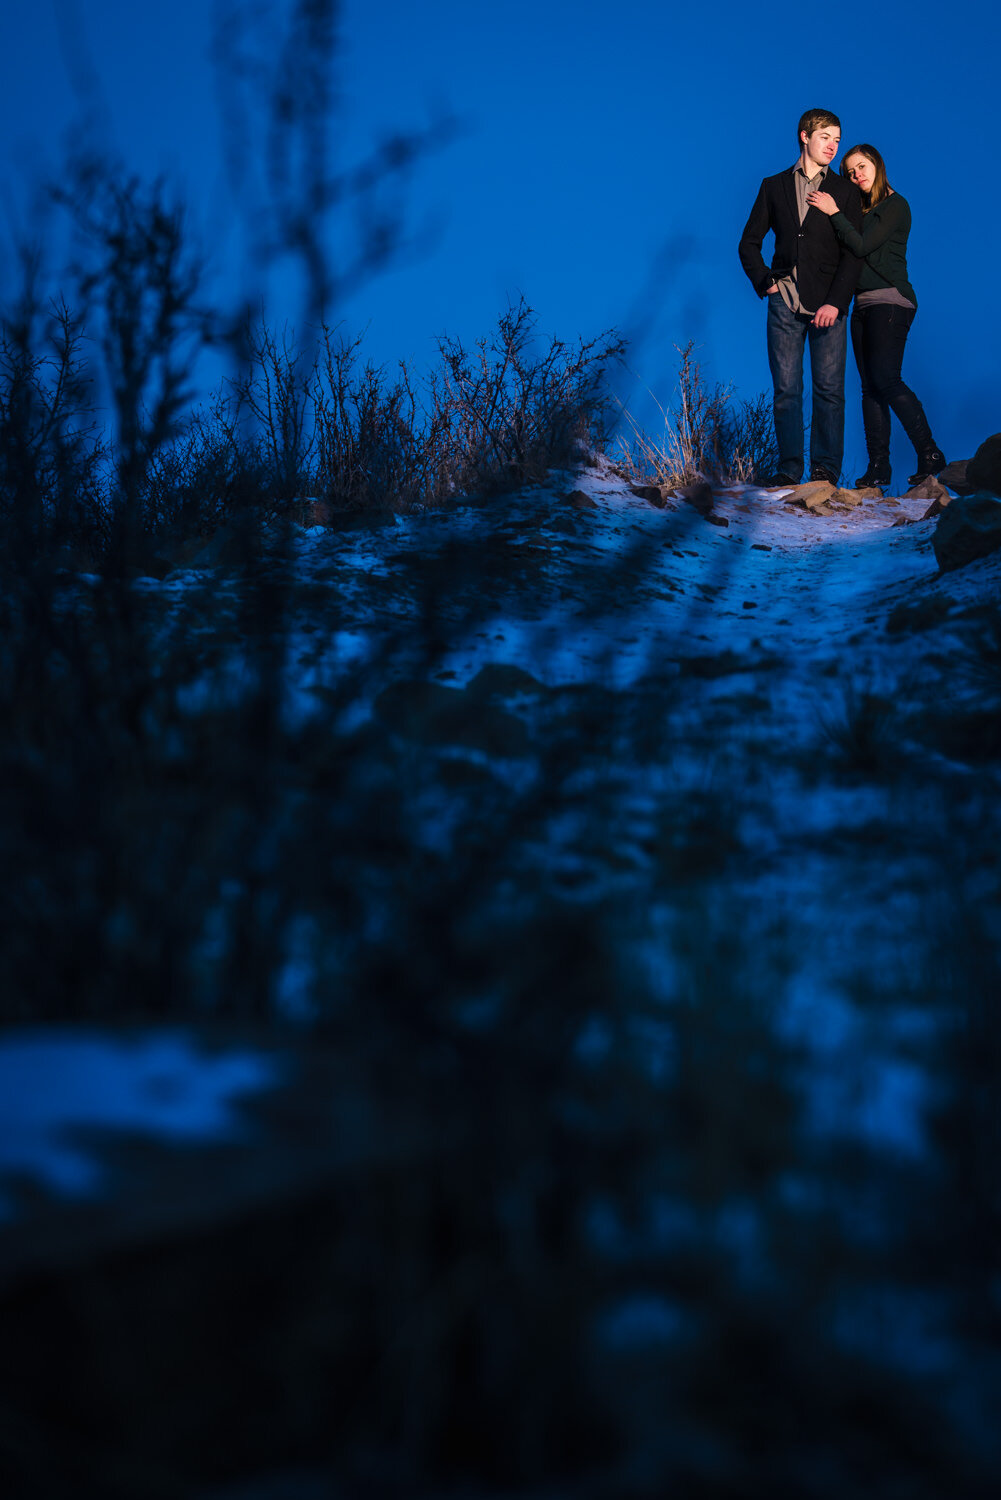  Winter snowy engagement pictures taken at the Horsetooth Reservoir in Fort Collins Colorado. Photographed by JMGant Photography. 